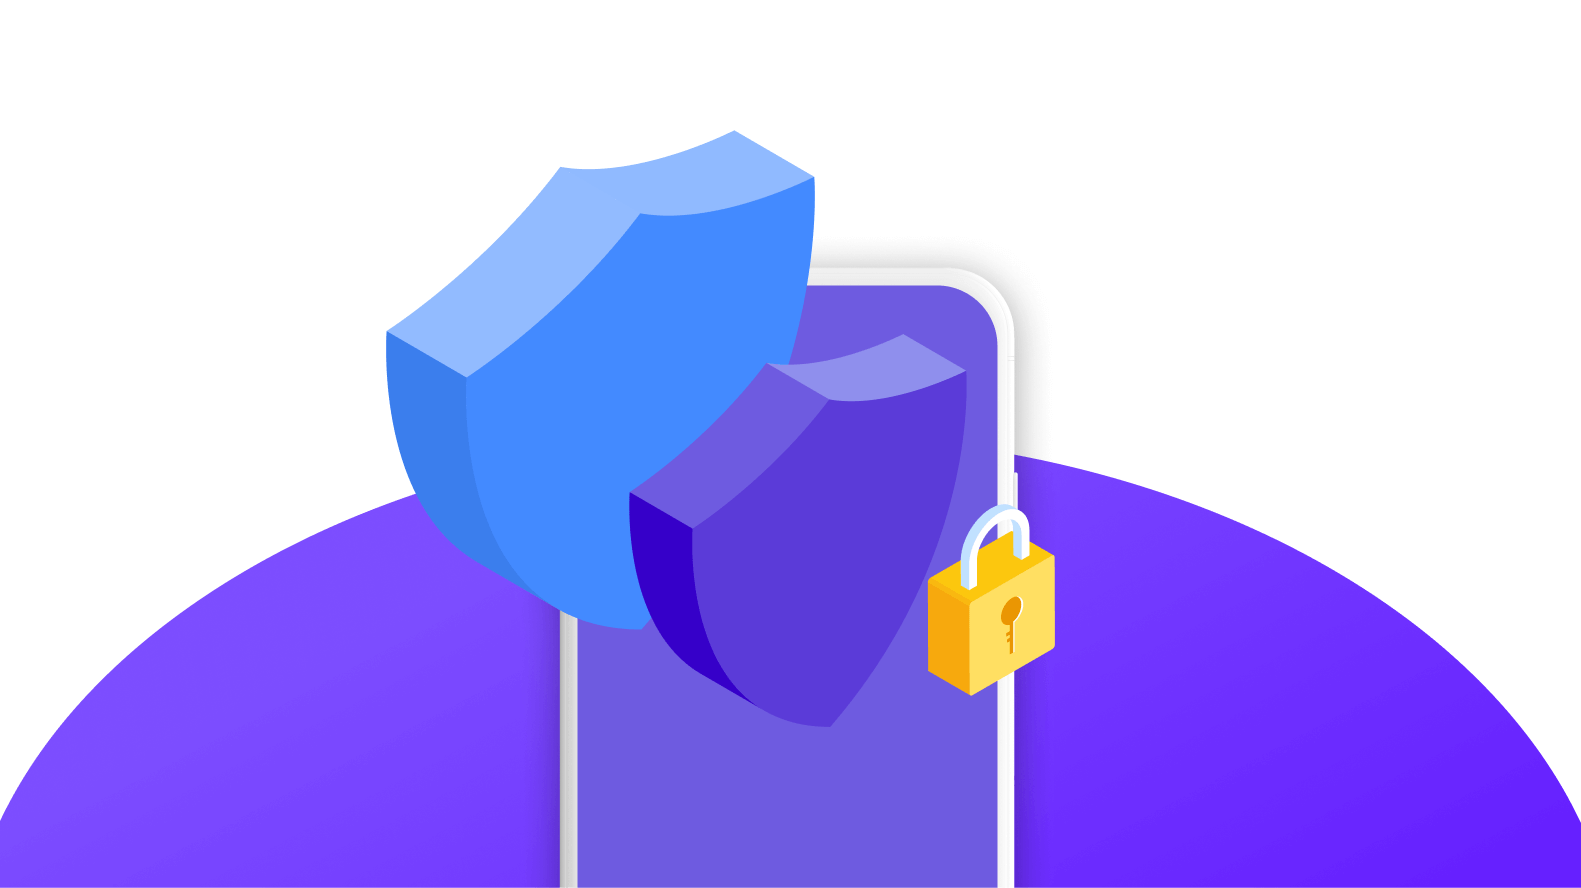 A concept of mobile app security highlighting two overlapping 3D shield shapes in the shades of blue and purple, featuring a yellow padlock with a keyhole in the lower right corner and a mobile frame in the background. The concept demonstrates digital security or protection.